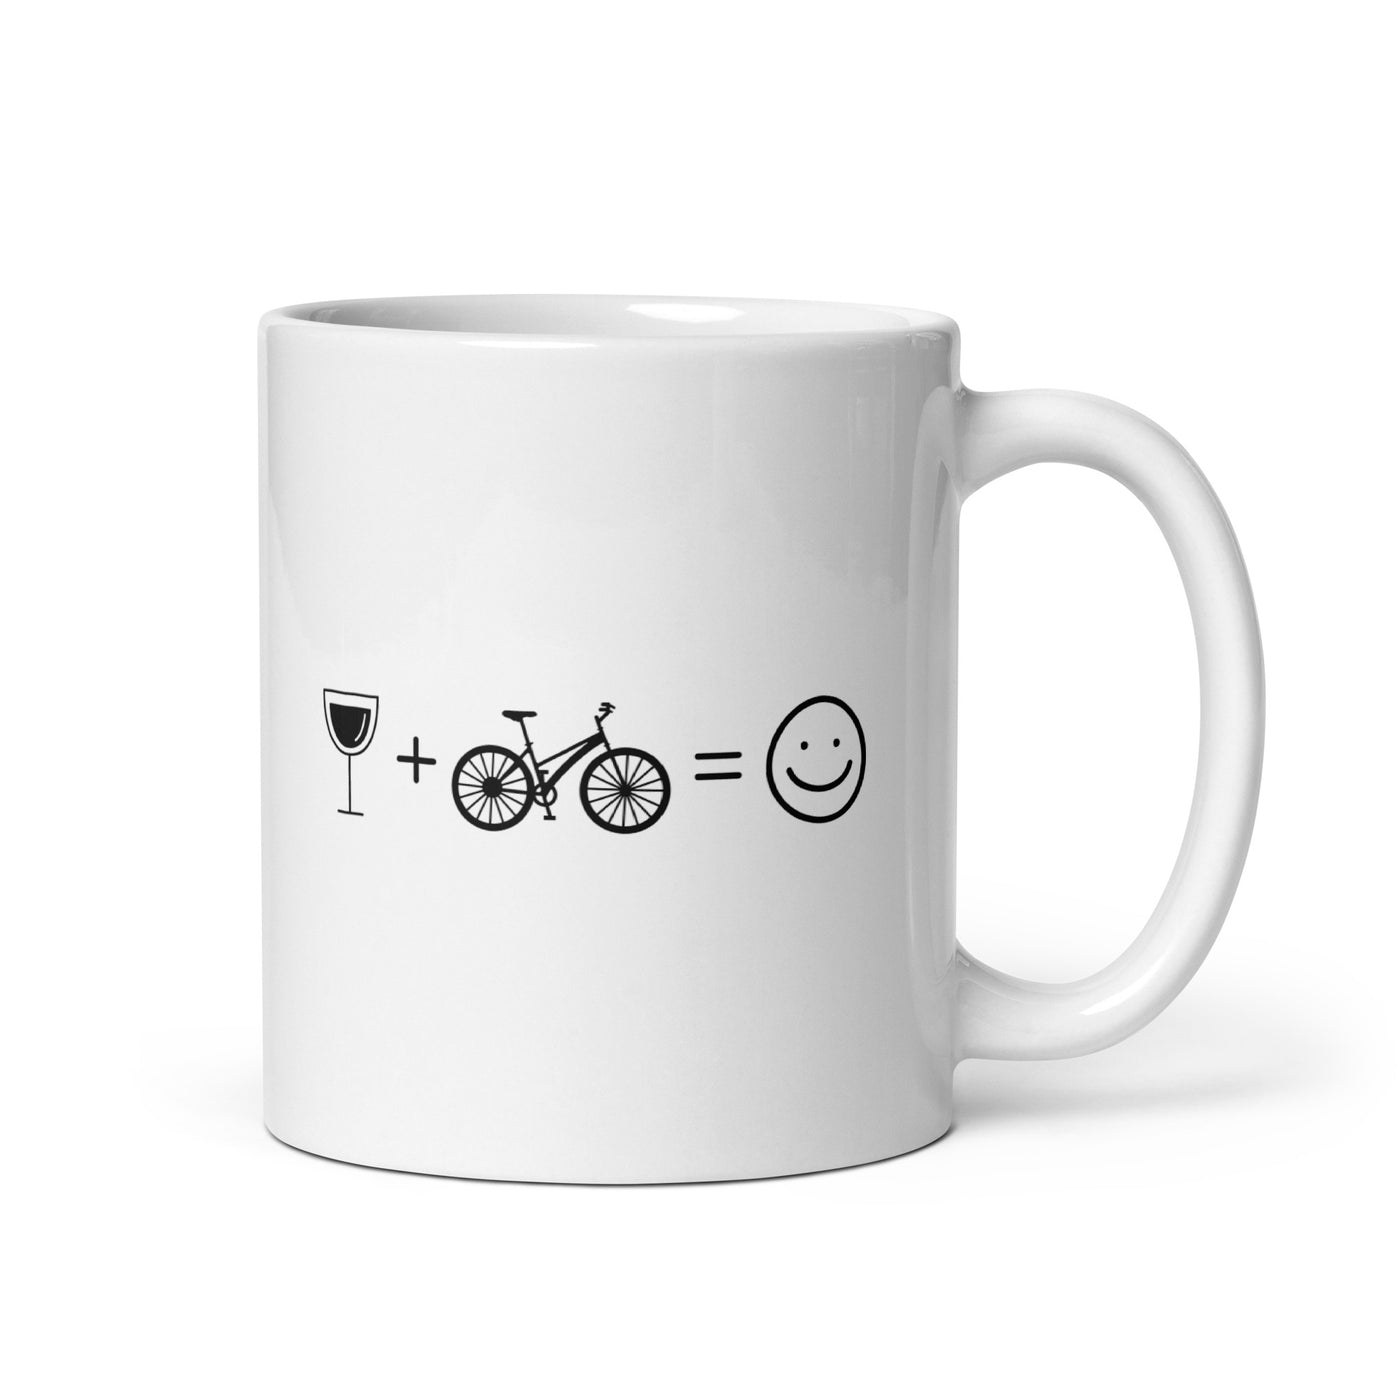 Wine Smile Face And Cycling - Tasse fahrrad